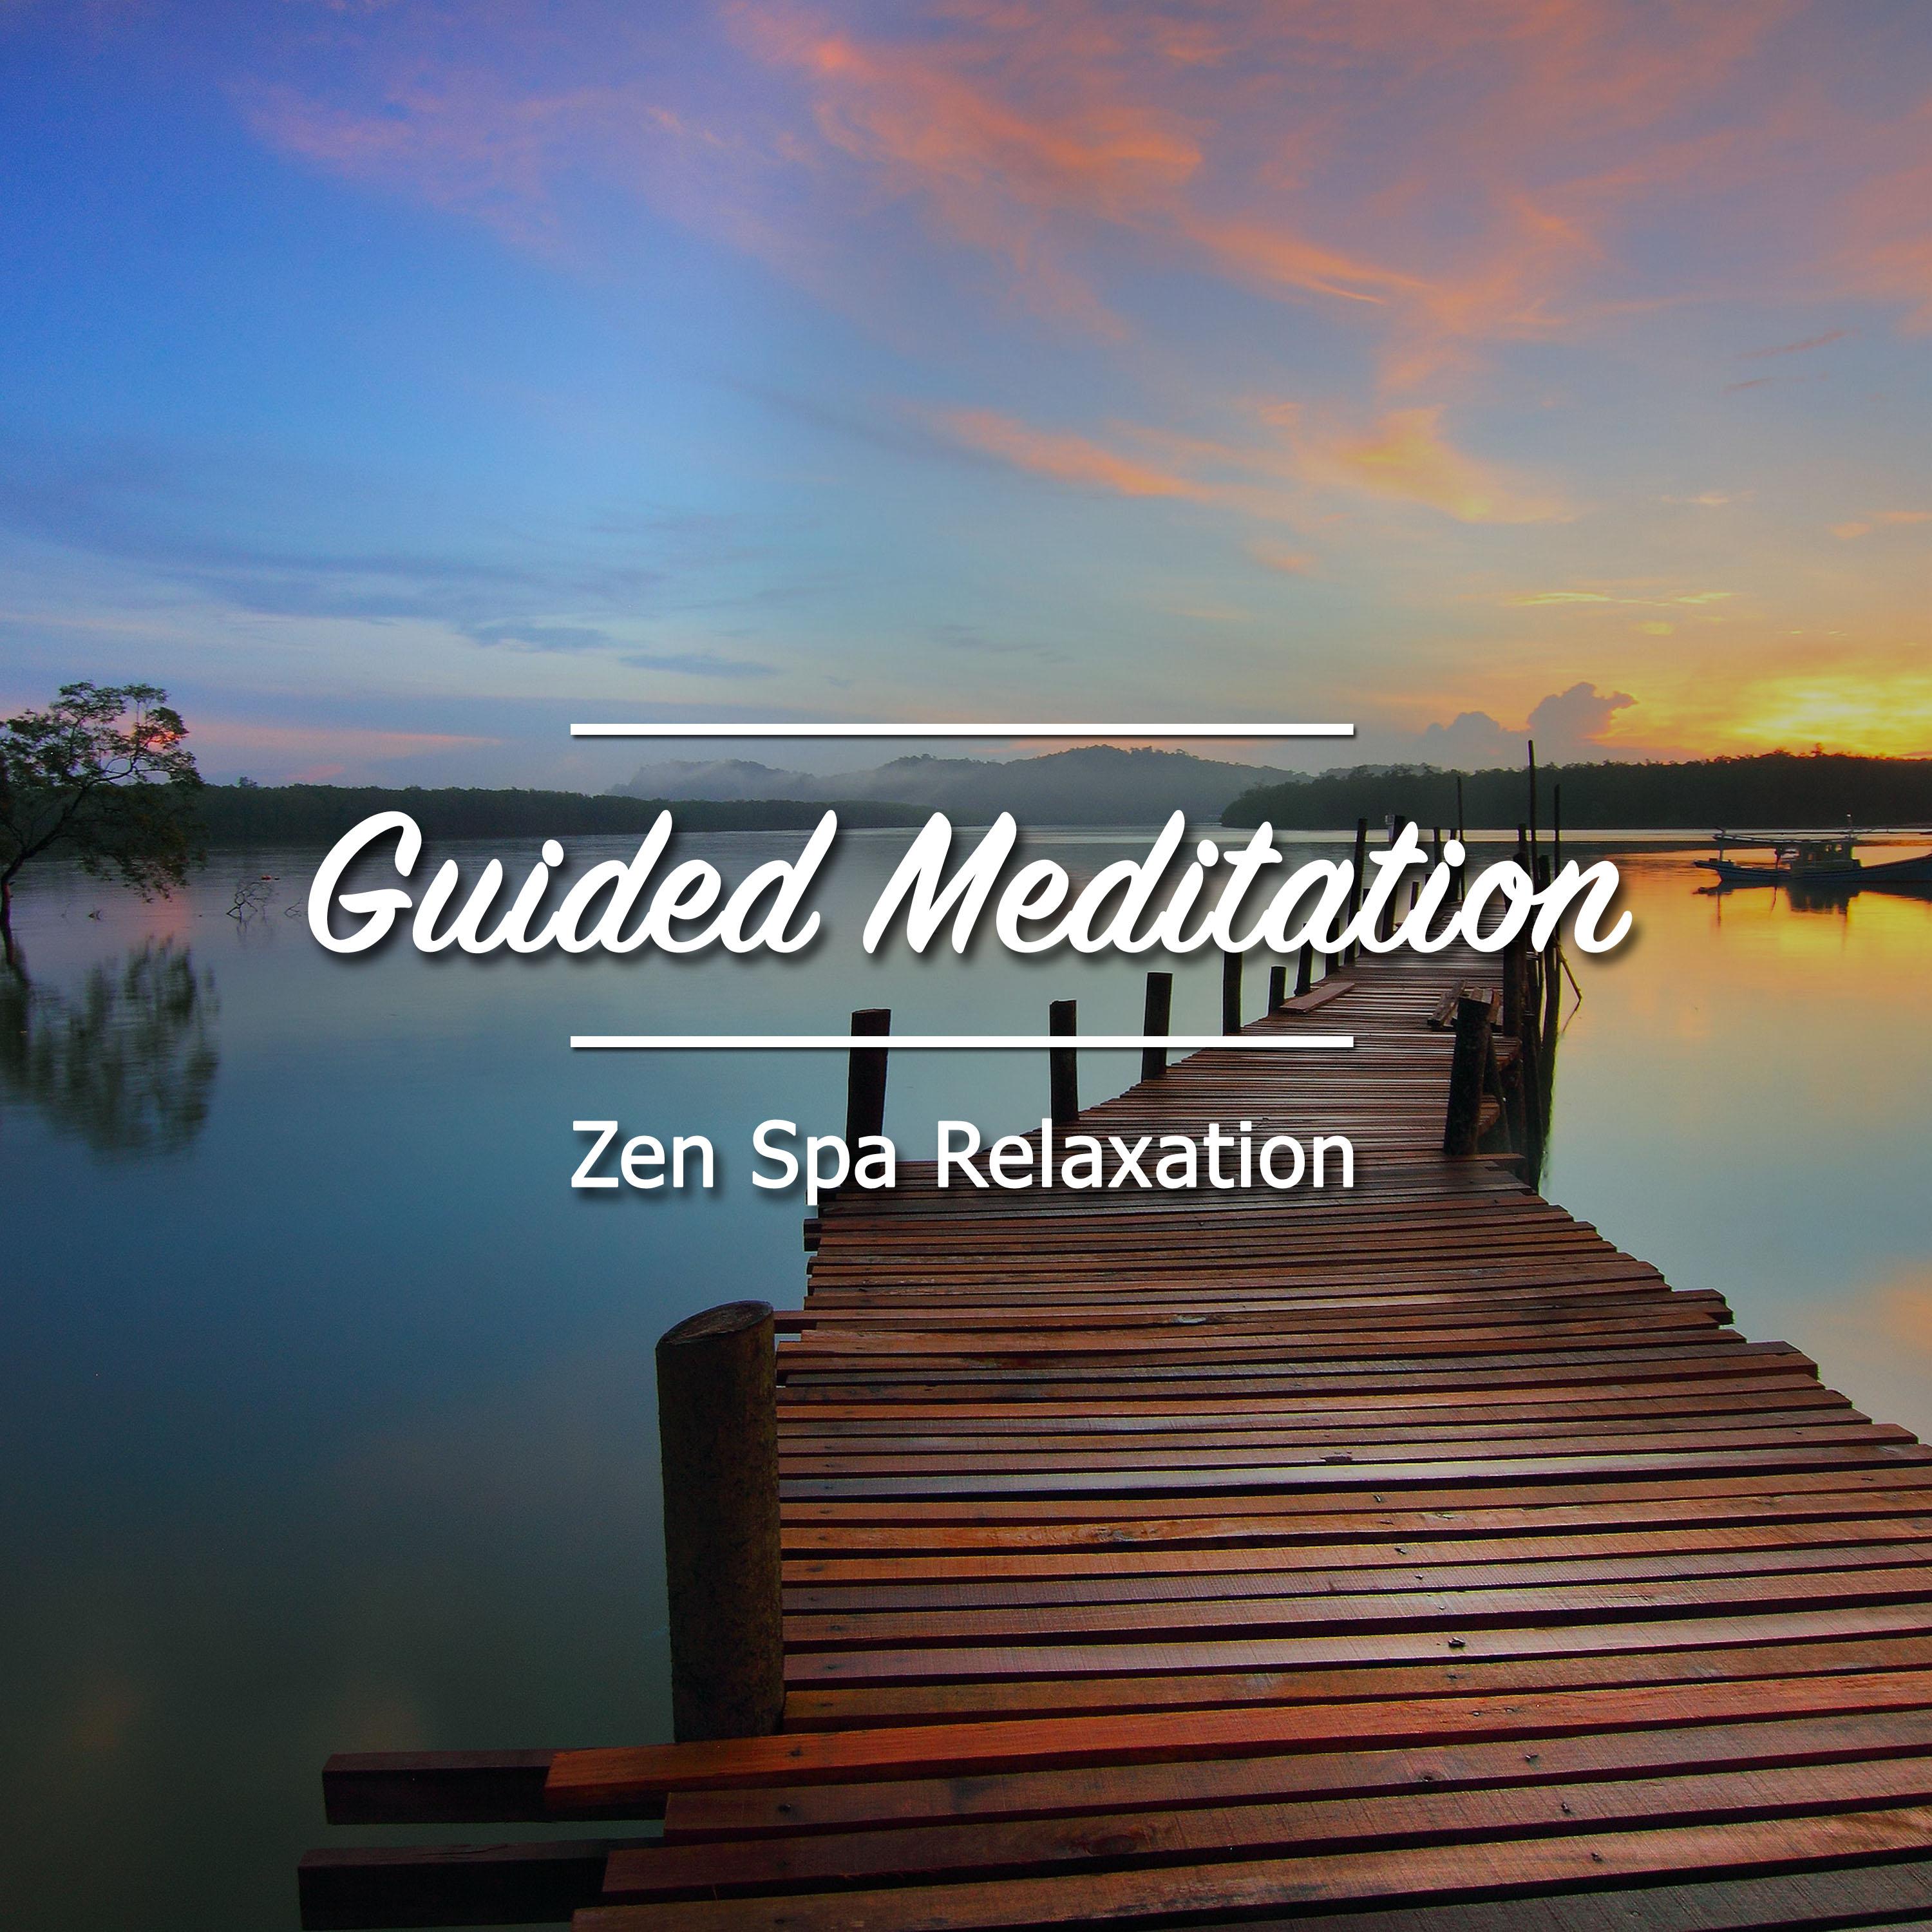 21 Guided Meditation and Zen Spa Relaxation Songs